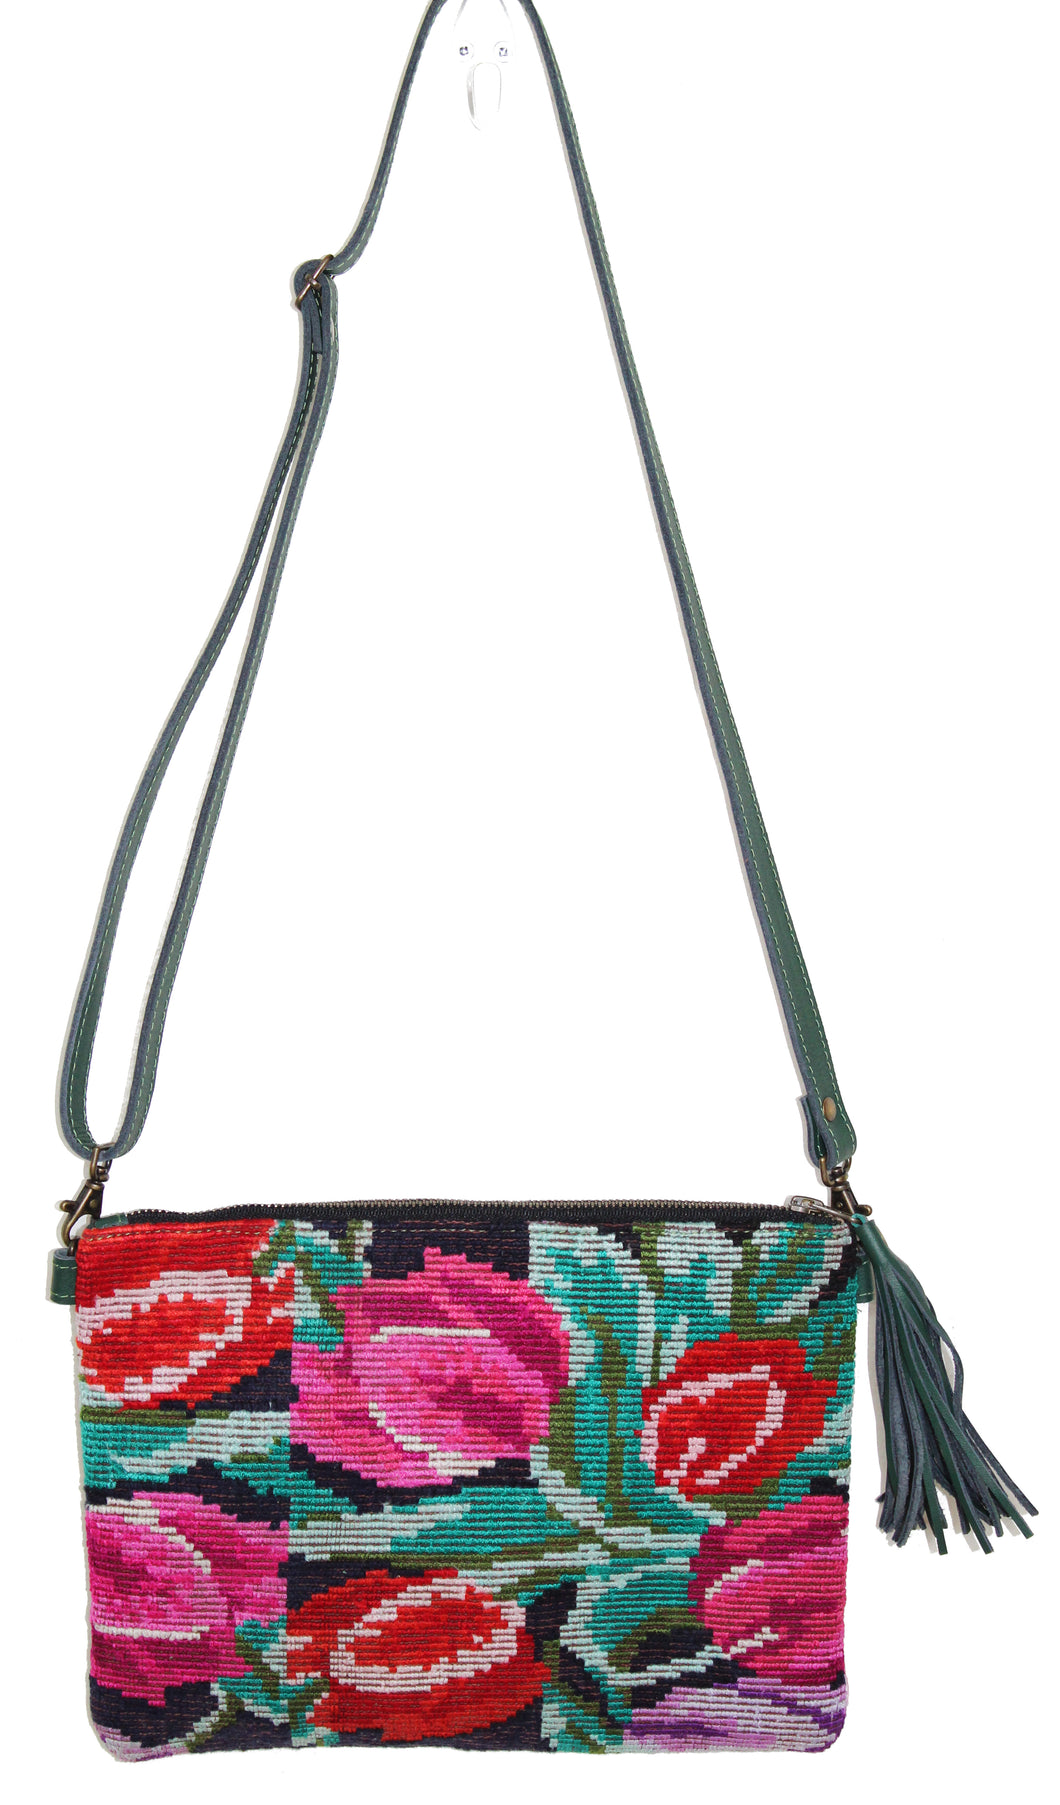 MoonLake Designs Lola small bag in dark green leather with floral huipil